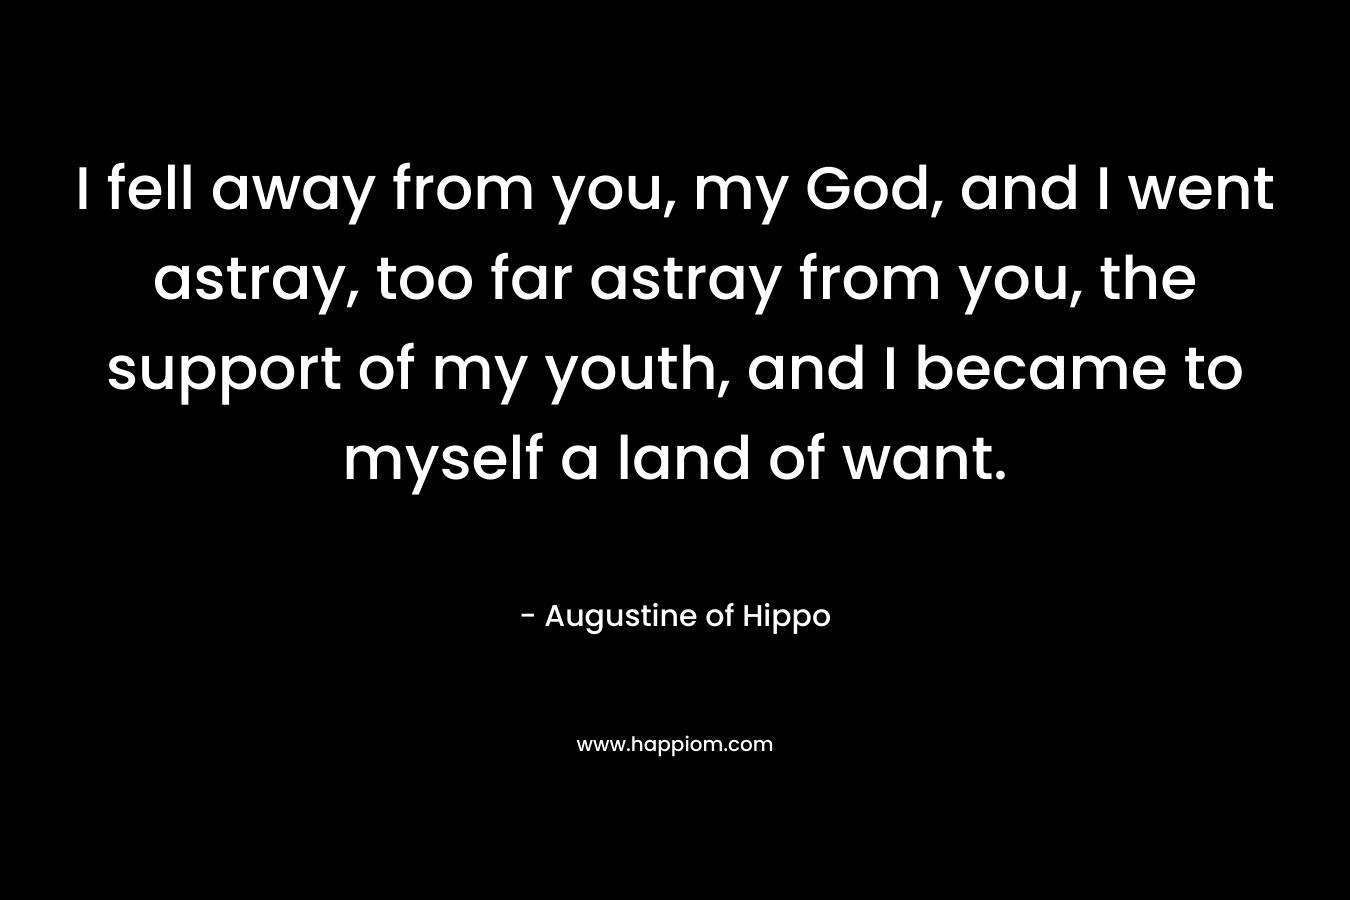 I fell away from you, my God, and I went astray, too far astray from you, the support of my youth, and I became to myself a land of want. – Augustine of Hippo